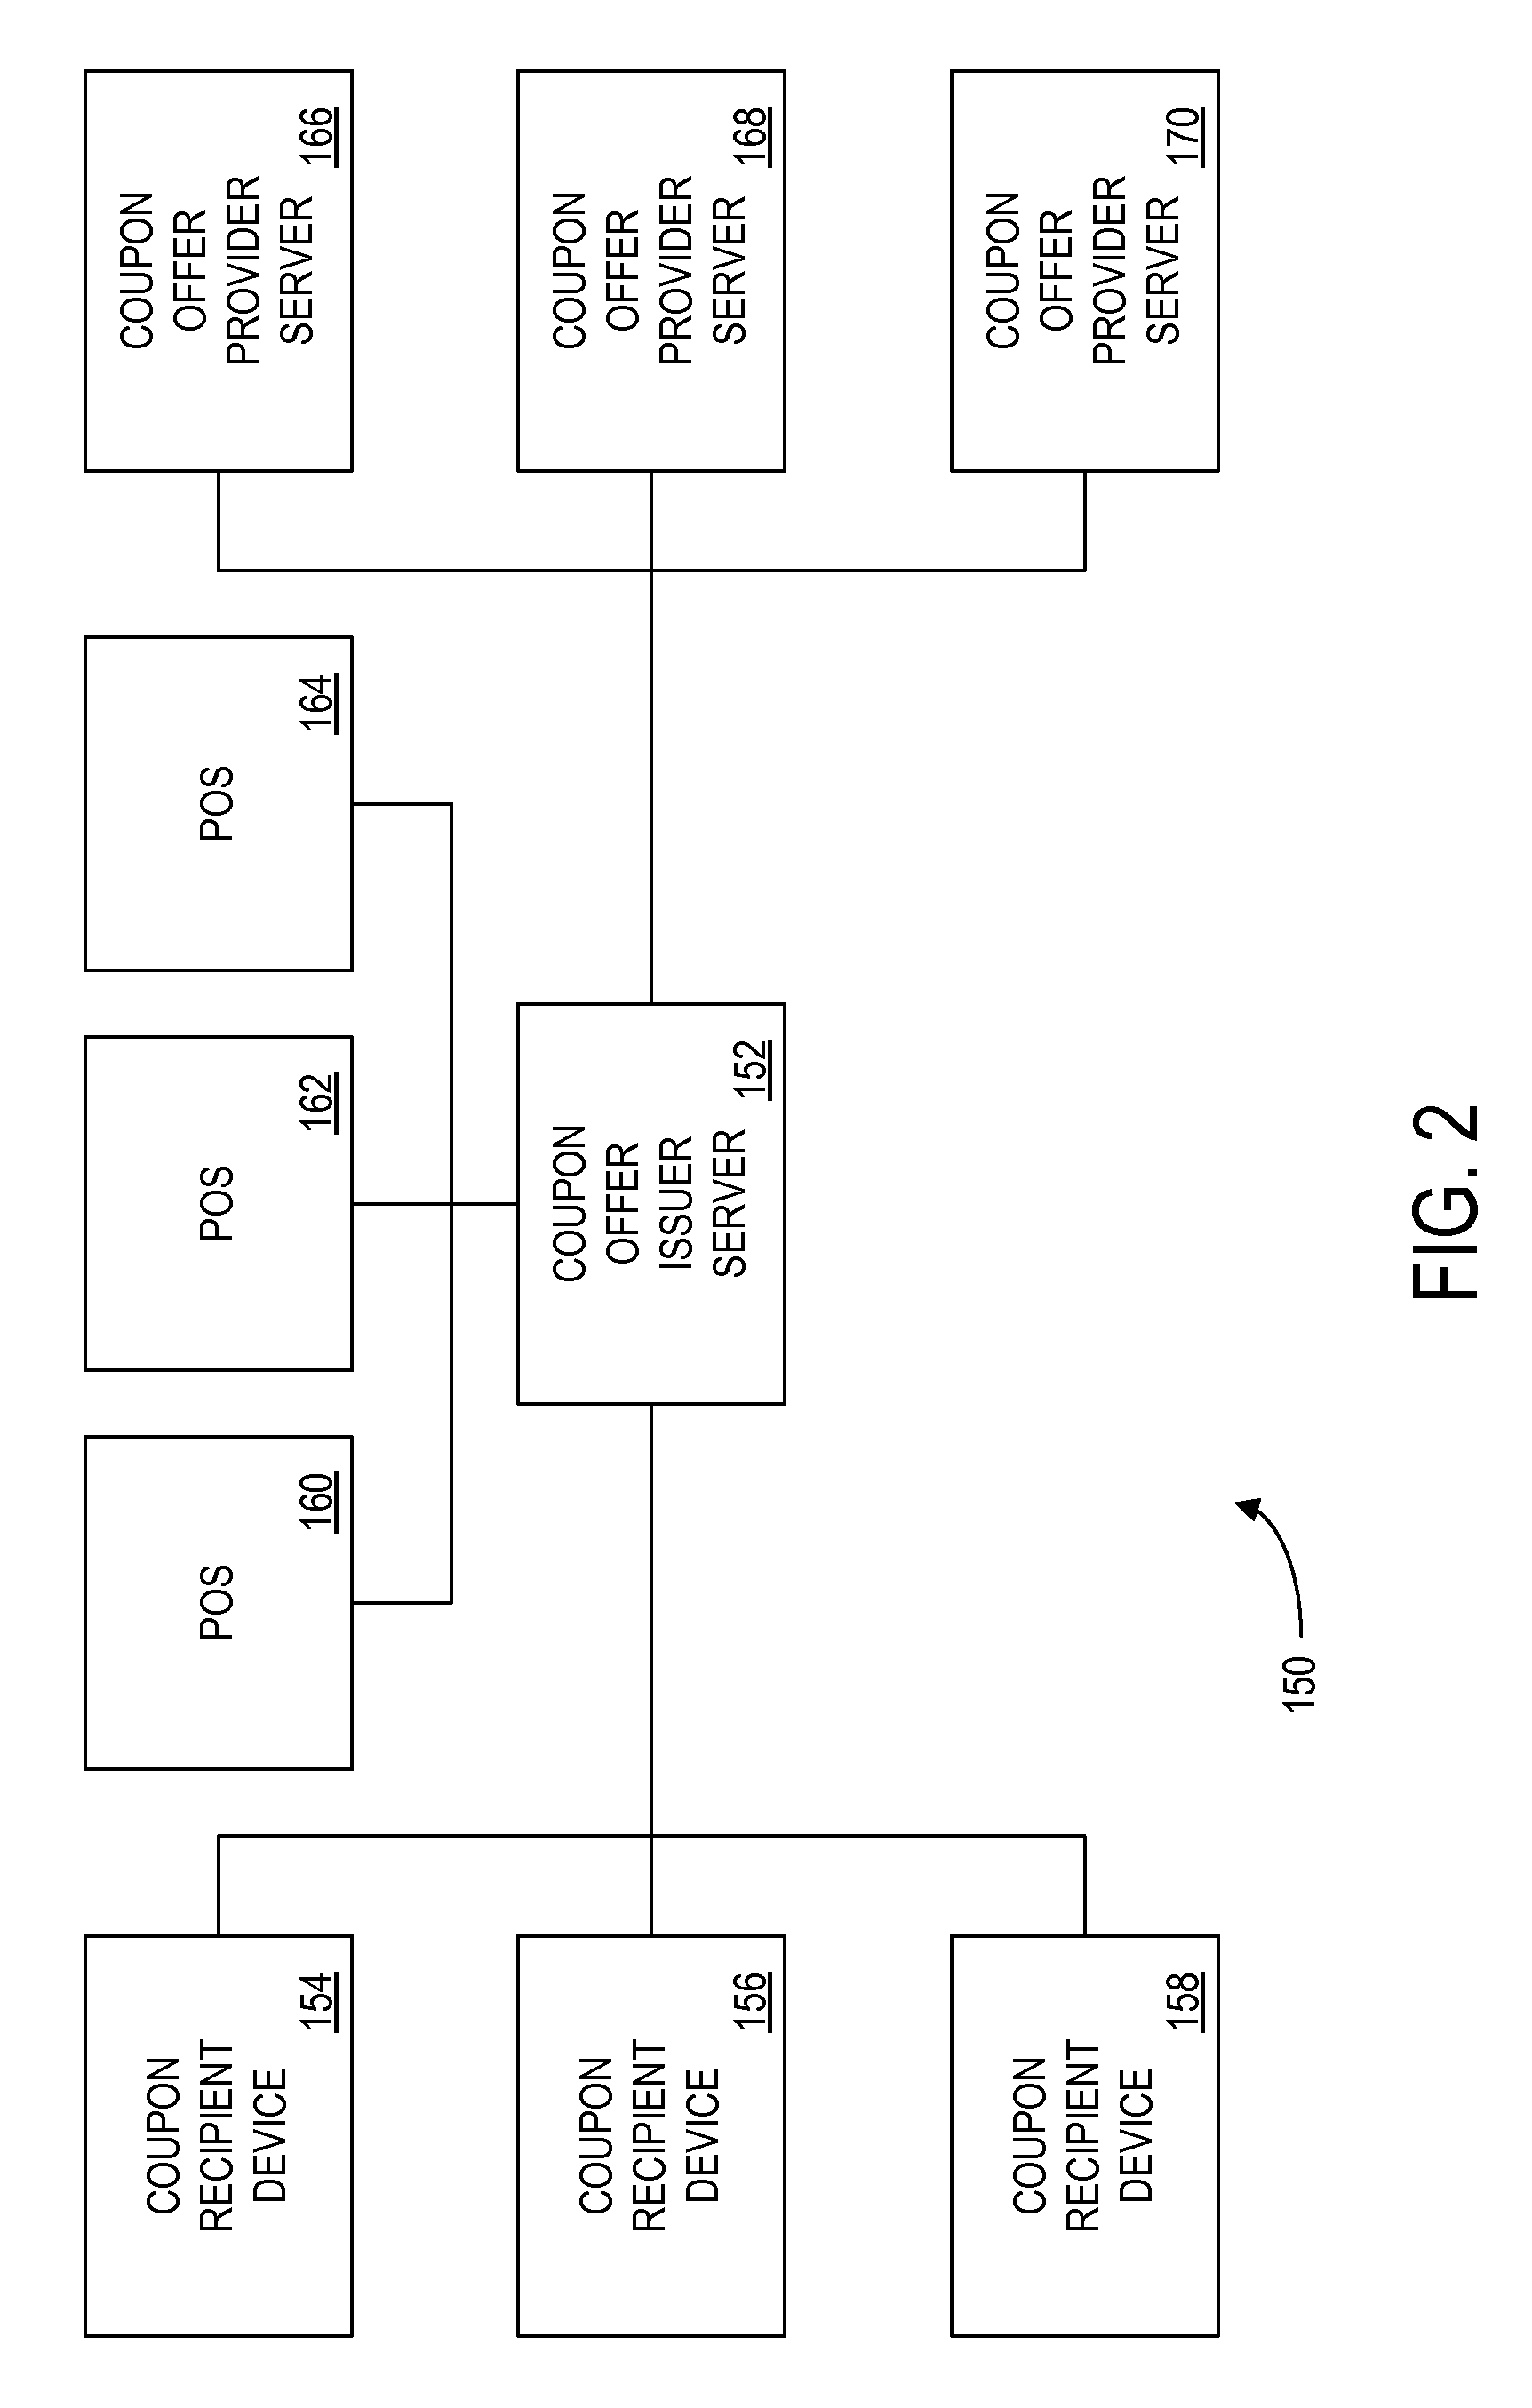 Method and apparatus for providing a coupon offer having a variable value